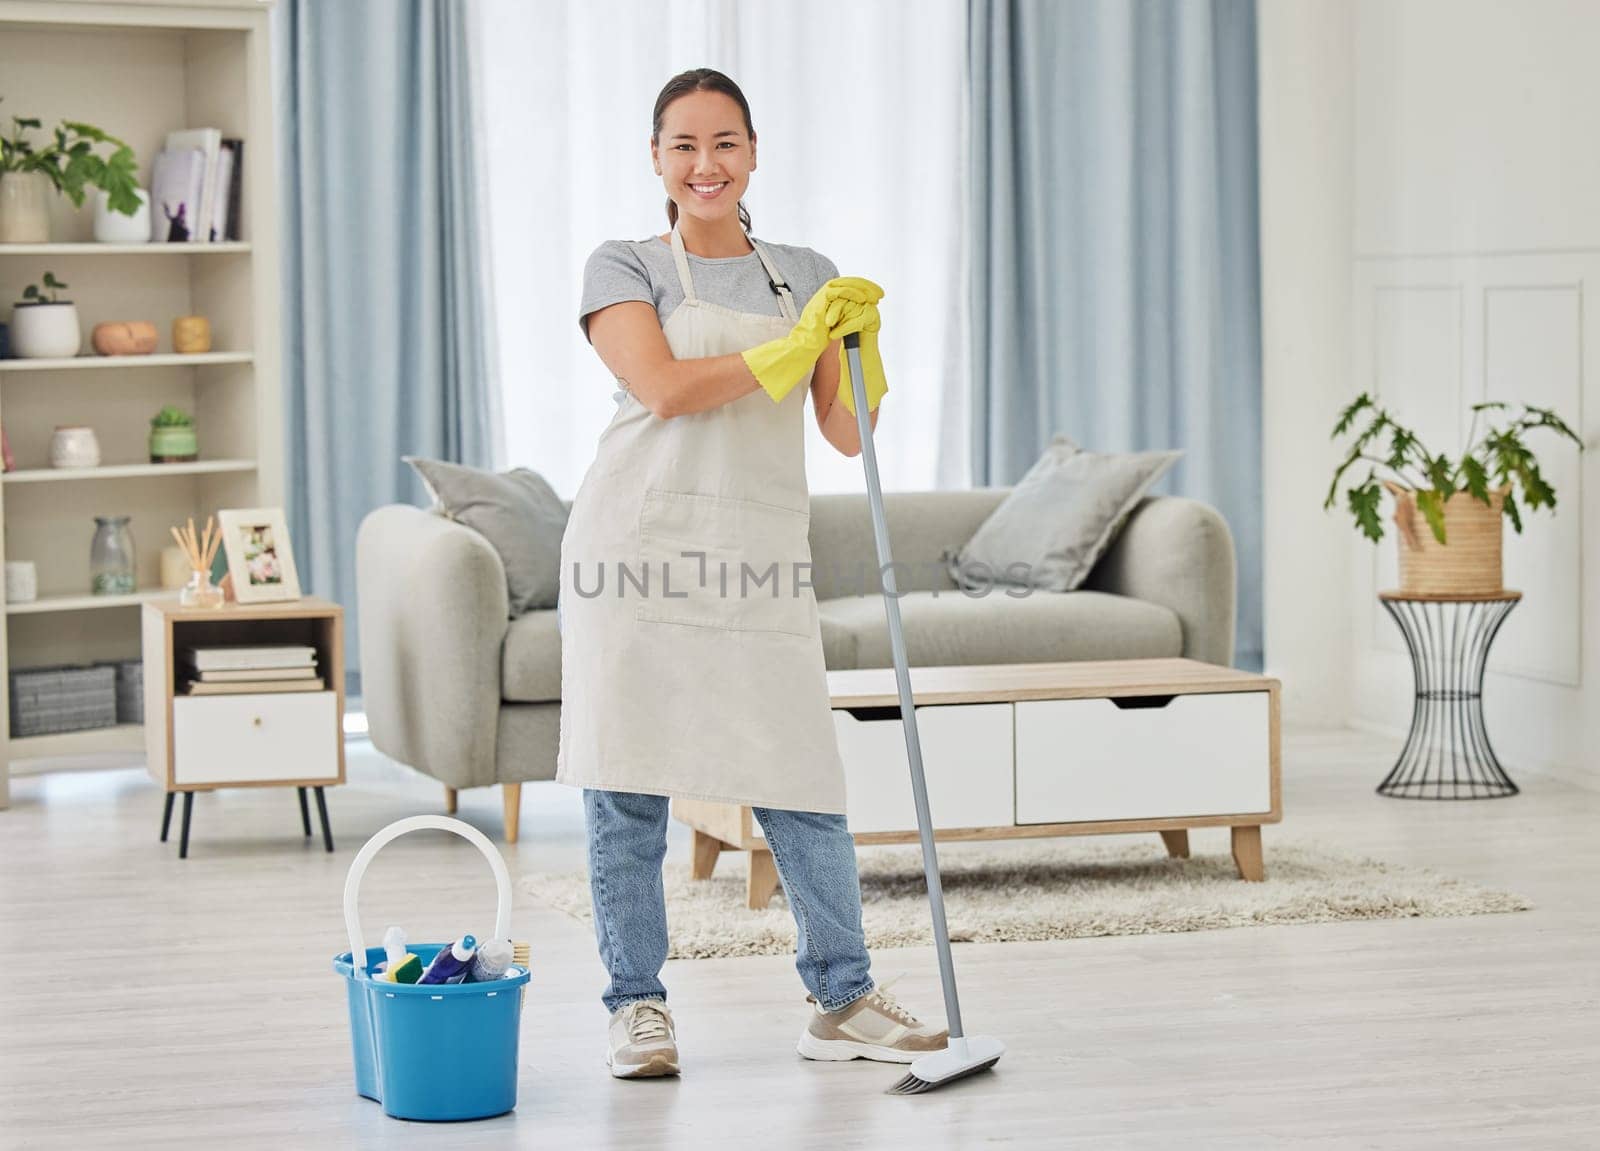 Portrait, broom and a woman cleaner sweeping the living room of a home for hygiene, service or housework. Smile, spring cleaning or housekeeping with an asian female maid standing in a domestic house.